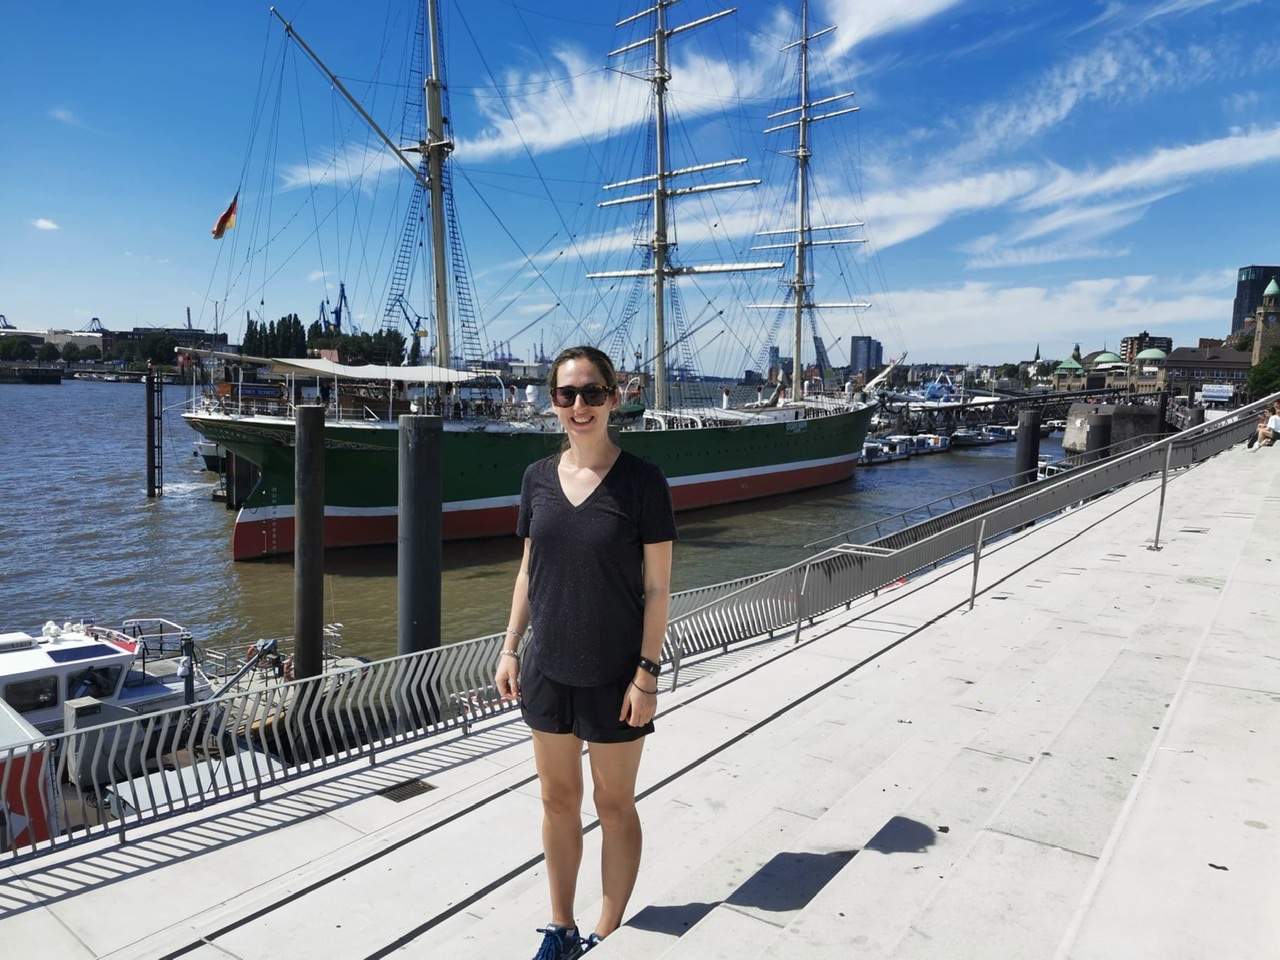 Young woman dressed in black shorts, t-shirt and sunglasses in front of tall ship at Hamburg Waterfront